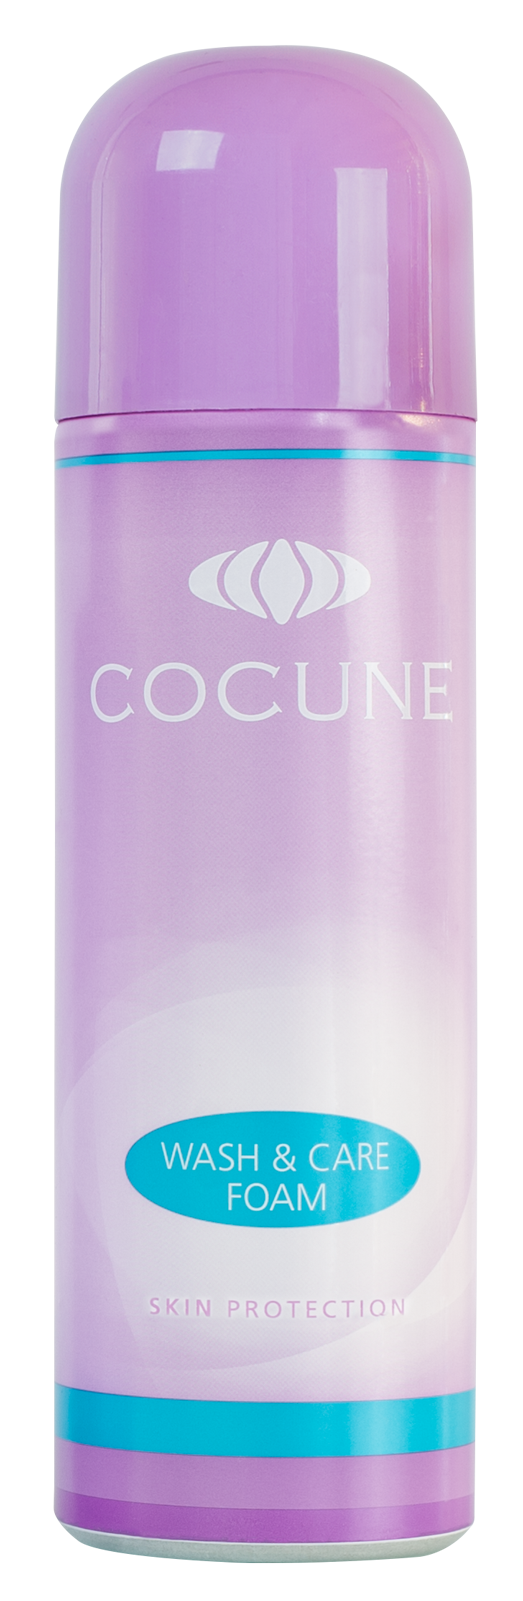 Cocune Barriere Creme